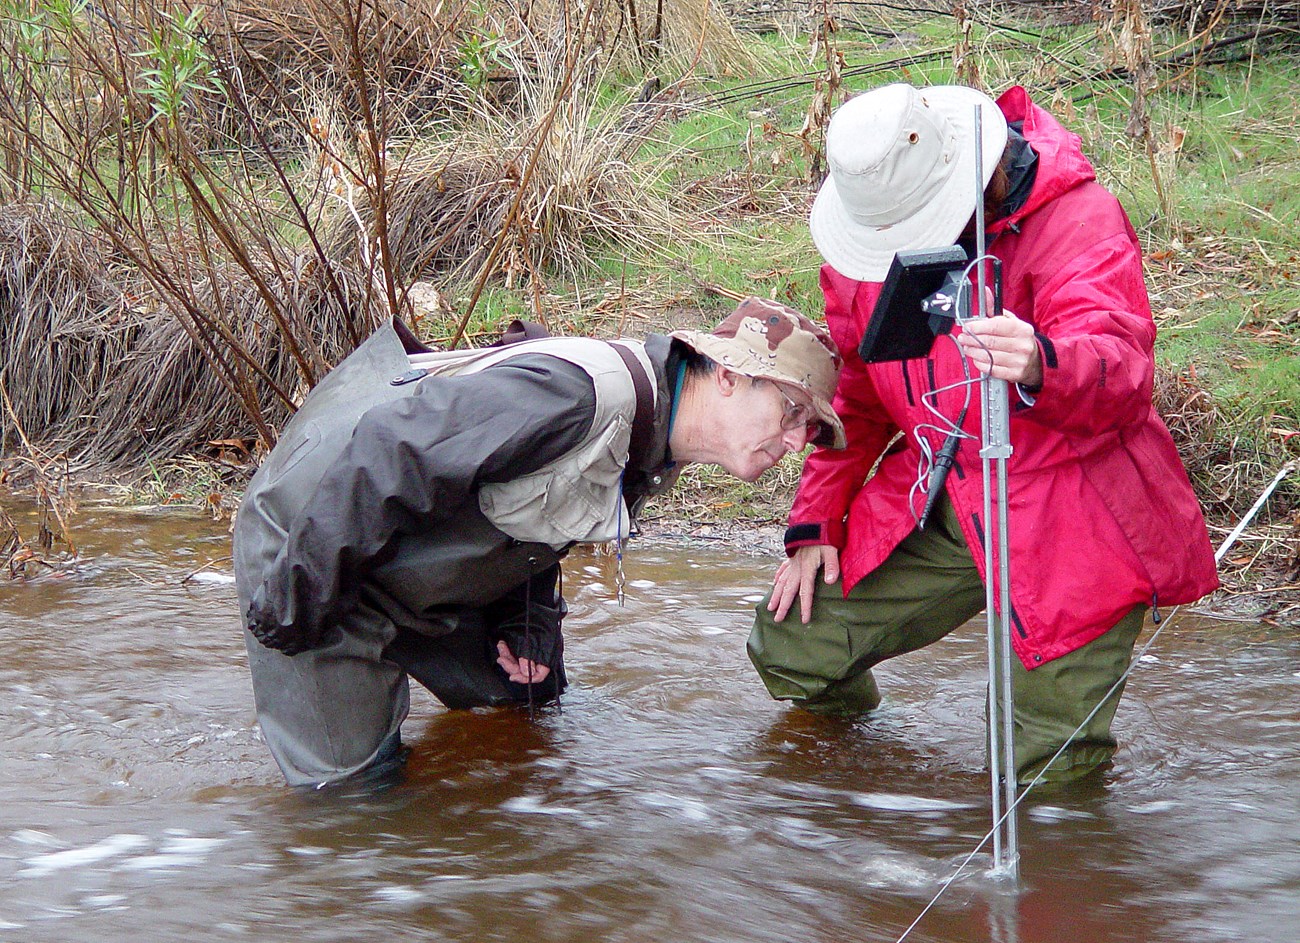 A man bending over to examine an instrument held by a woman. Both are standing in a stream.